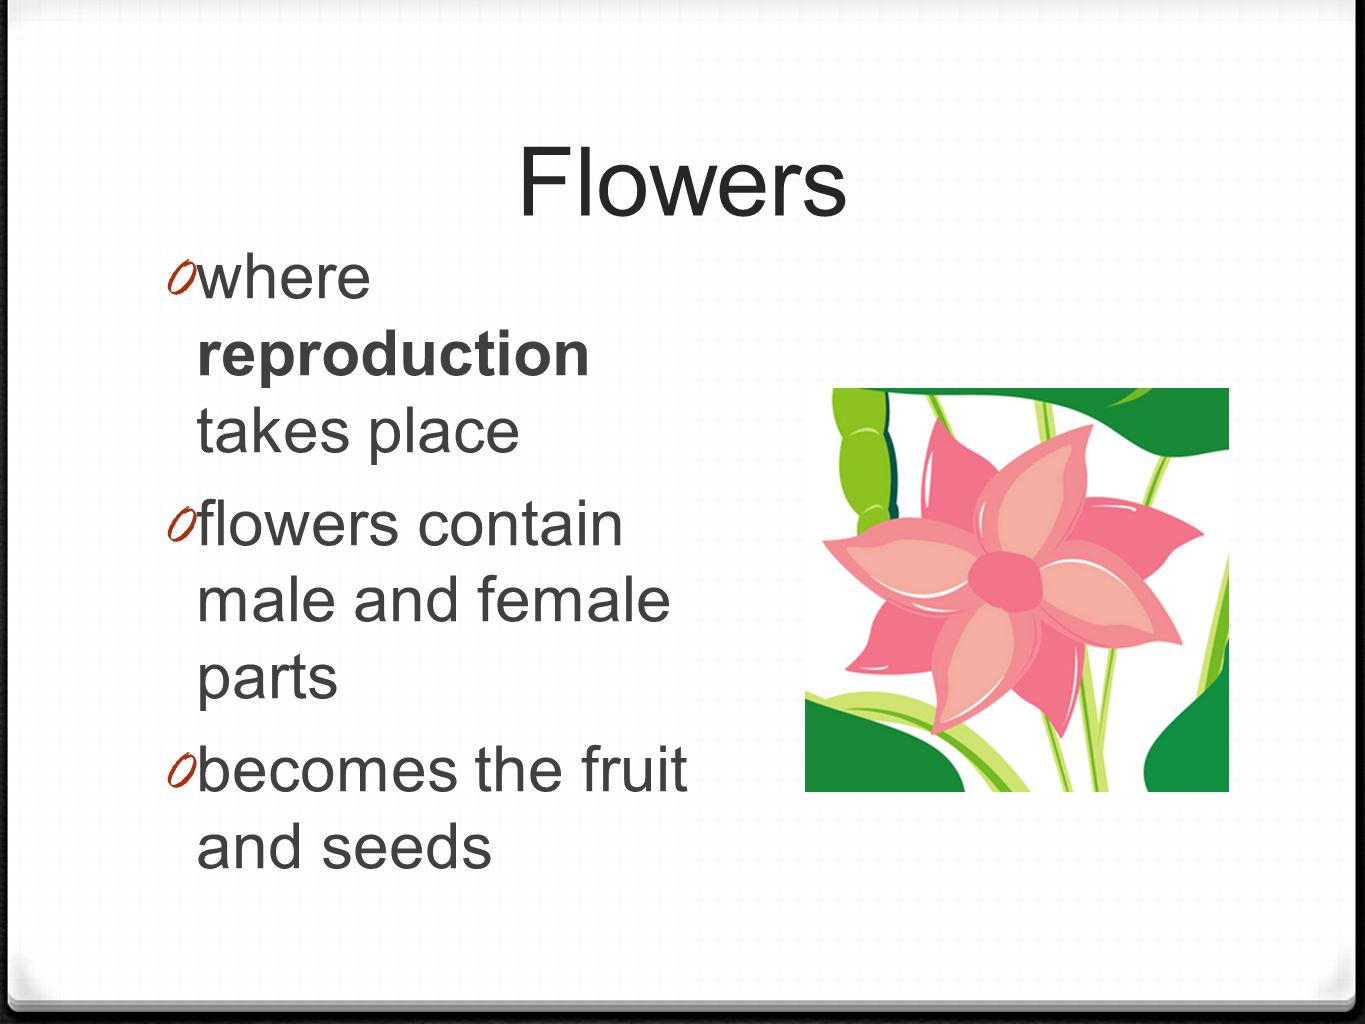 Flowers 0 where reproduction takes place 0 flowers contain male and female parts 0 becomes the fruit and seeds